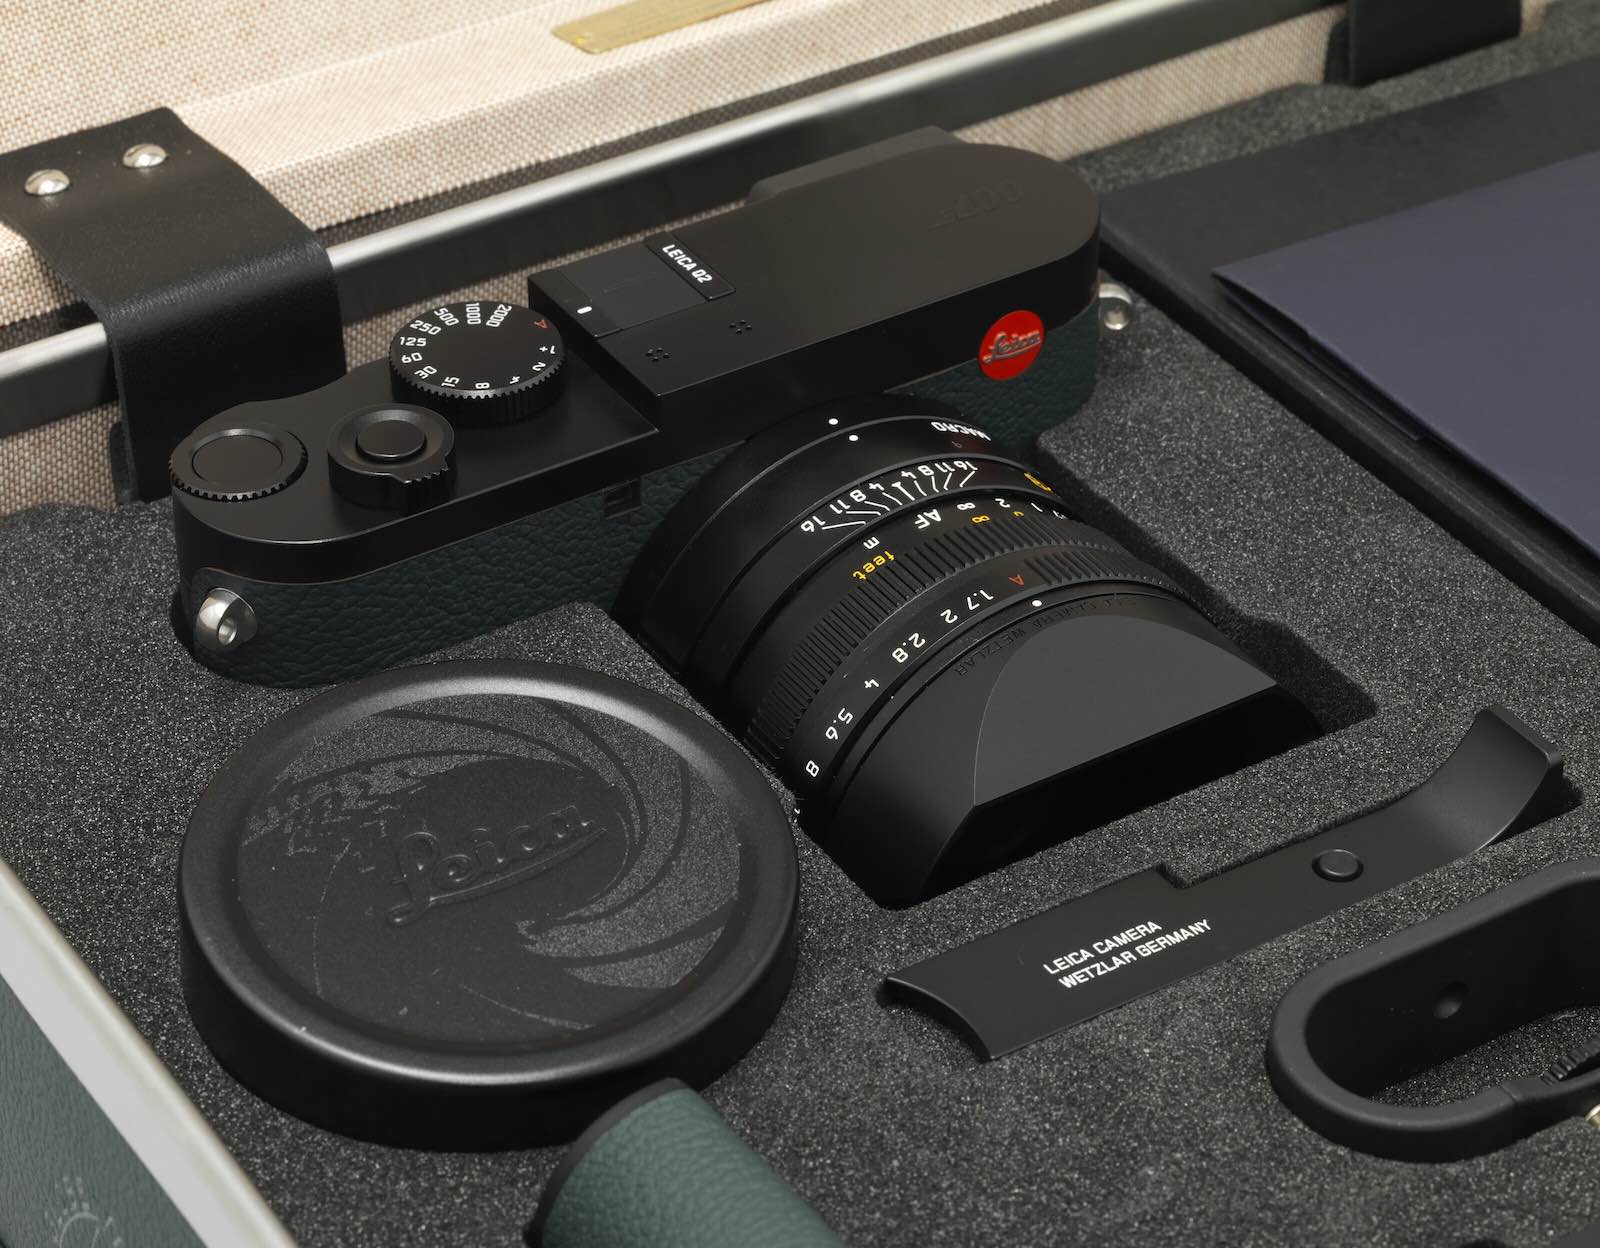 Special 007 Edition Leica D-Lux 7 Celebrates 60 Years of James Bond